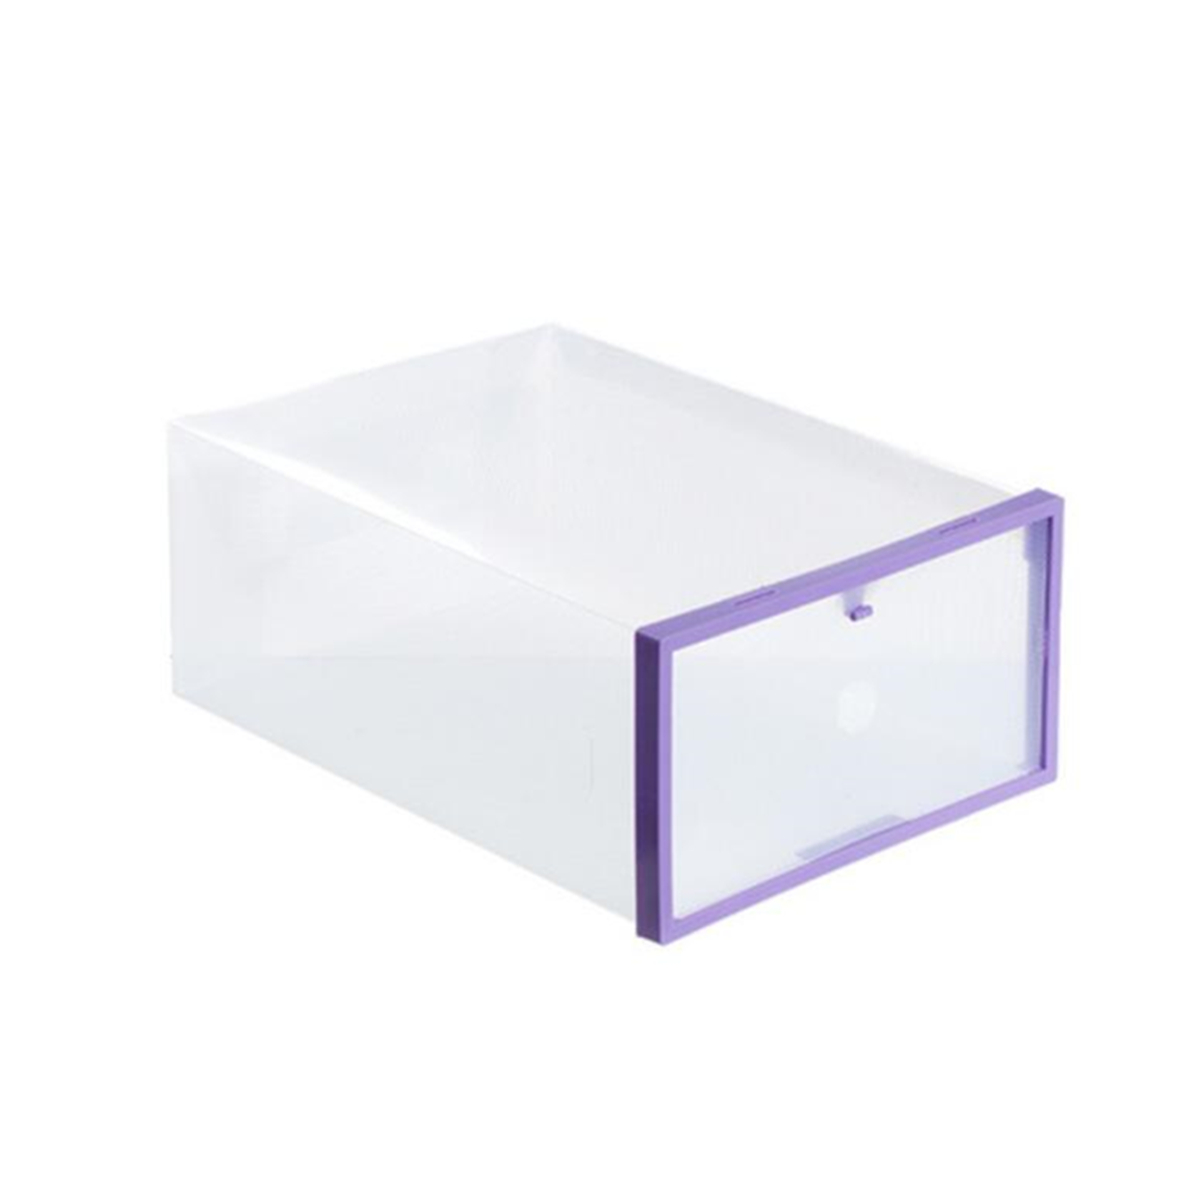 Foldable-Clear-Plastic-Shoe-Boxes-Storage-Organizer-Stackable-Tidy-Display-Box-Baskets-1465766-10